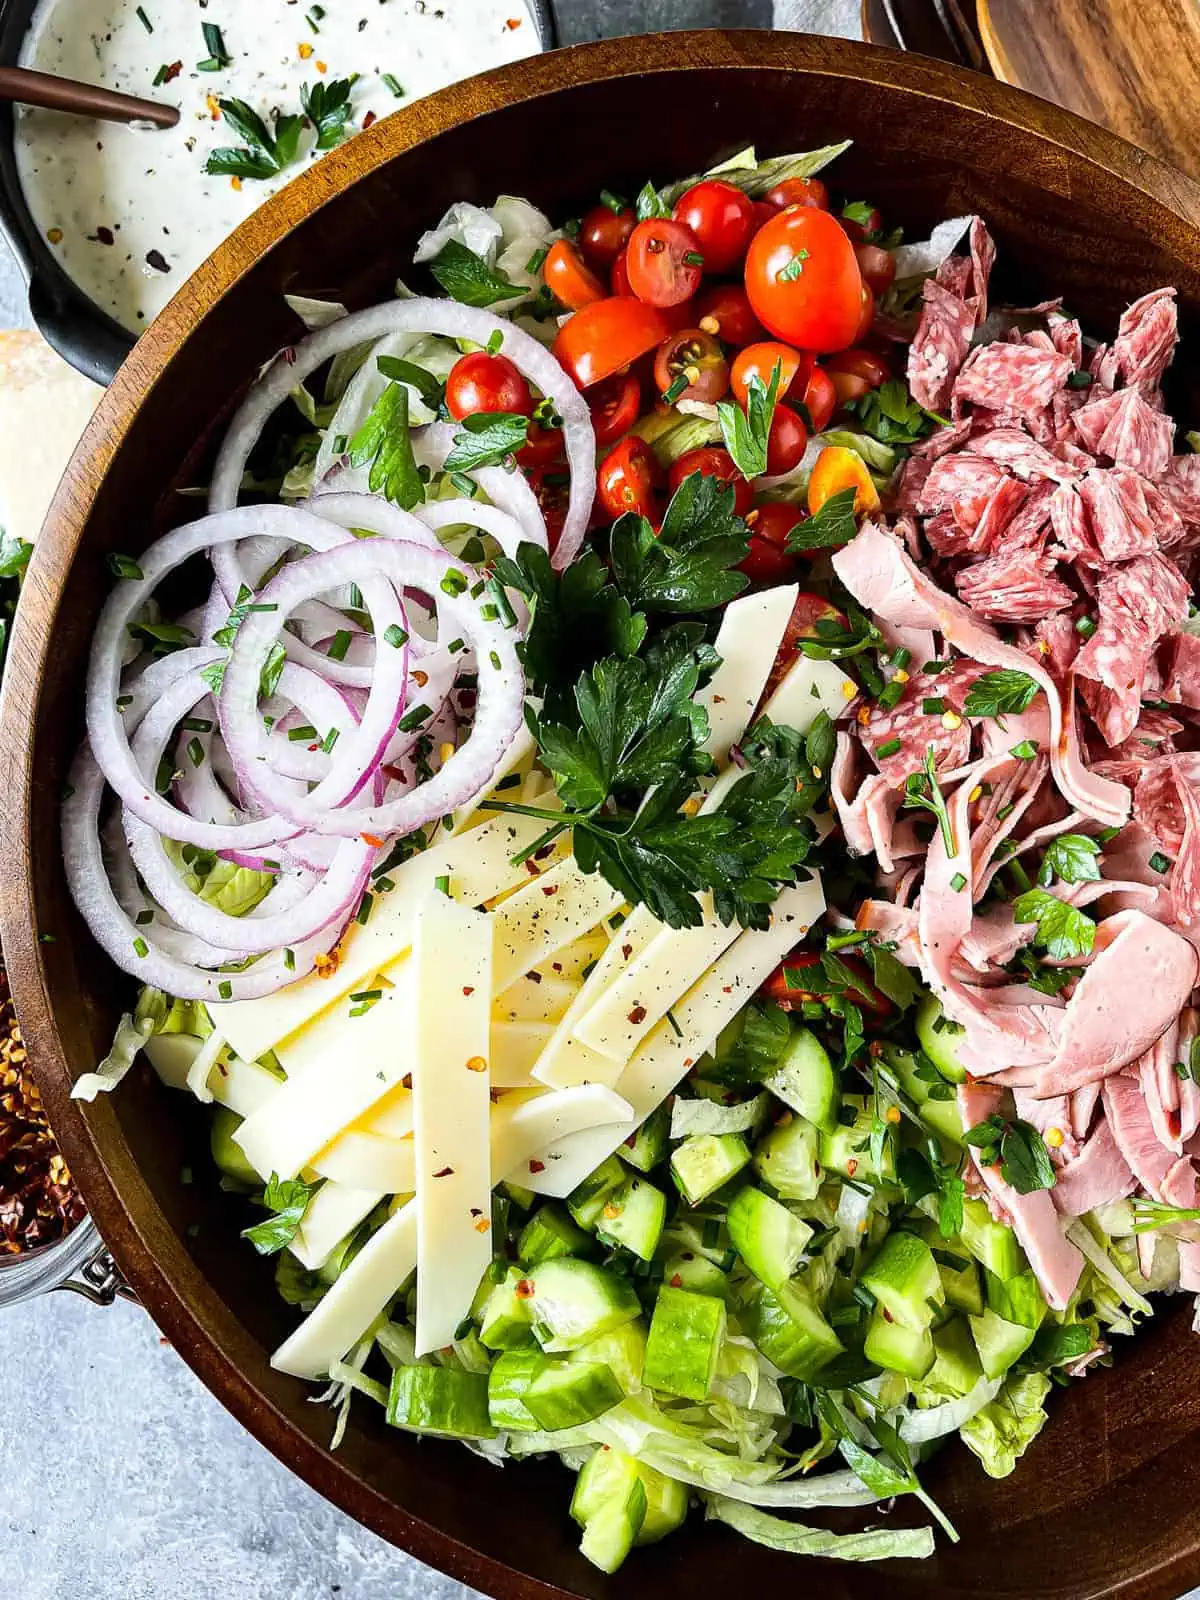 Overhead shot of a grinder salad with all the ingredients and dressing on the side